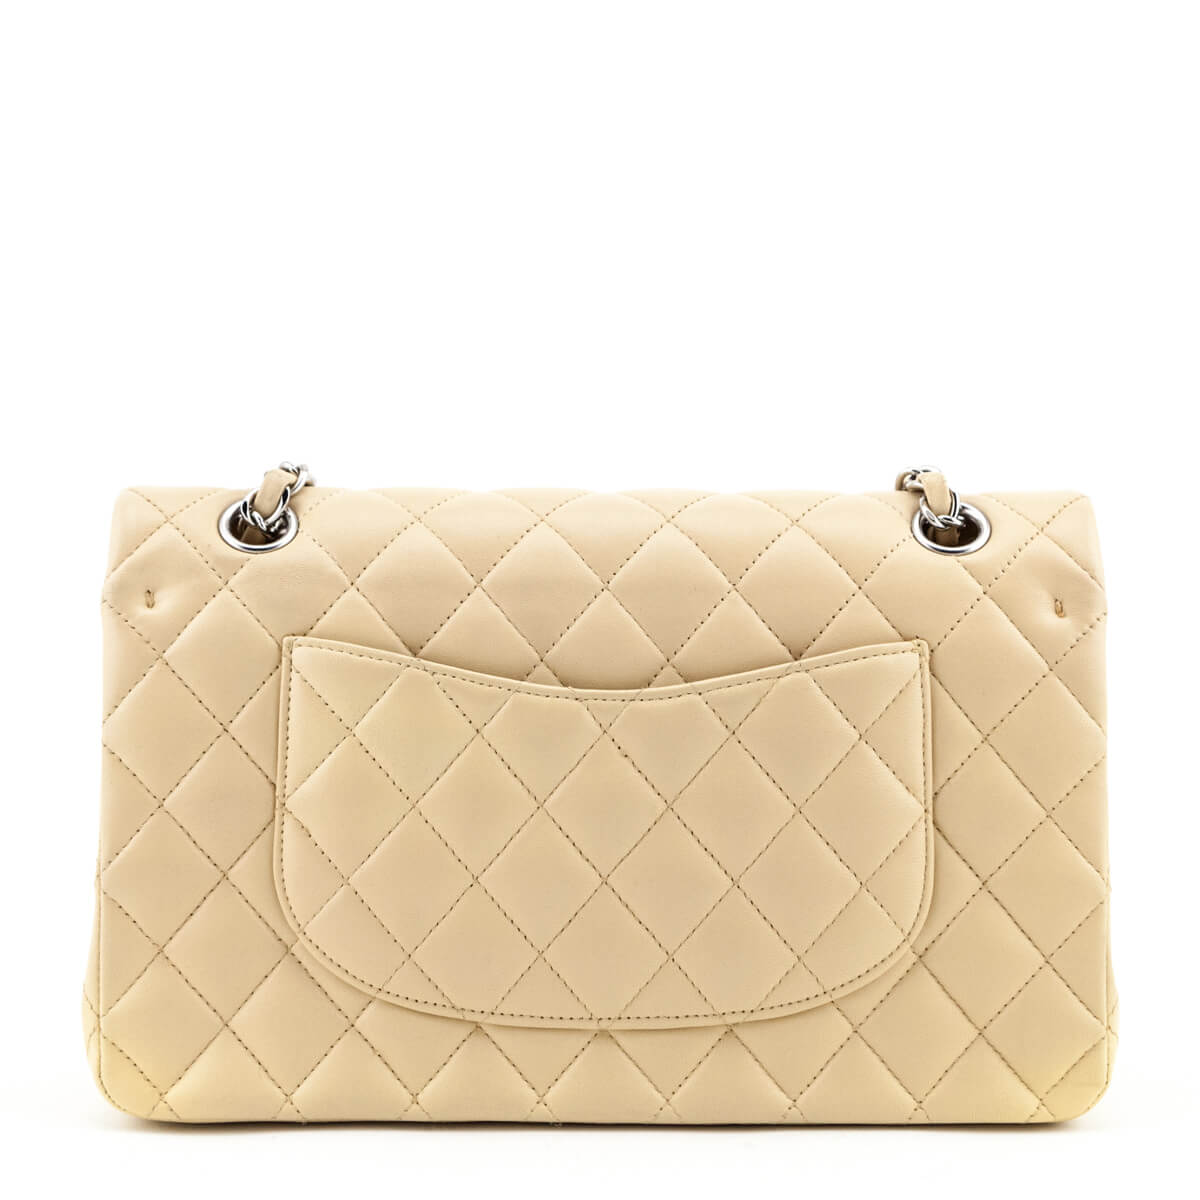 Chanel Beige Quilted Lambskin Medium Classic Double Flap Bag SHW